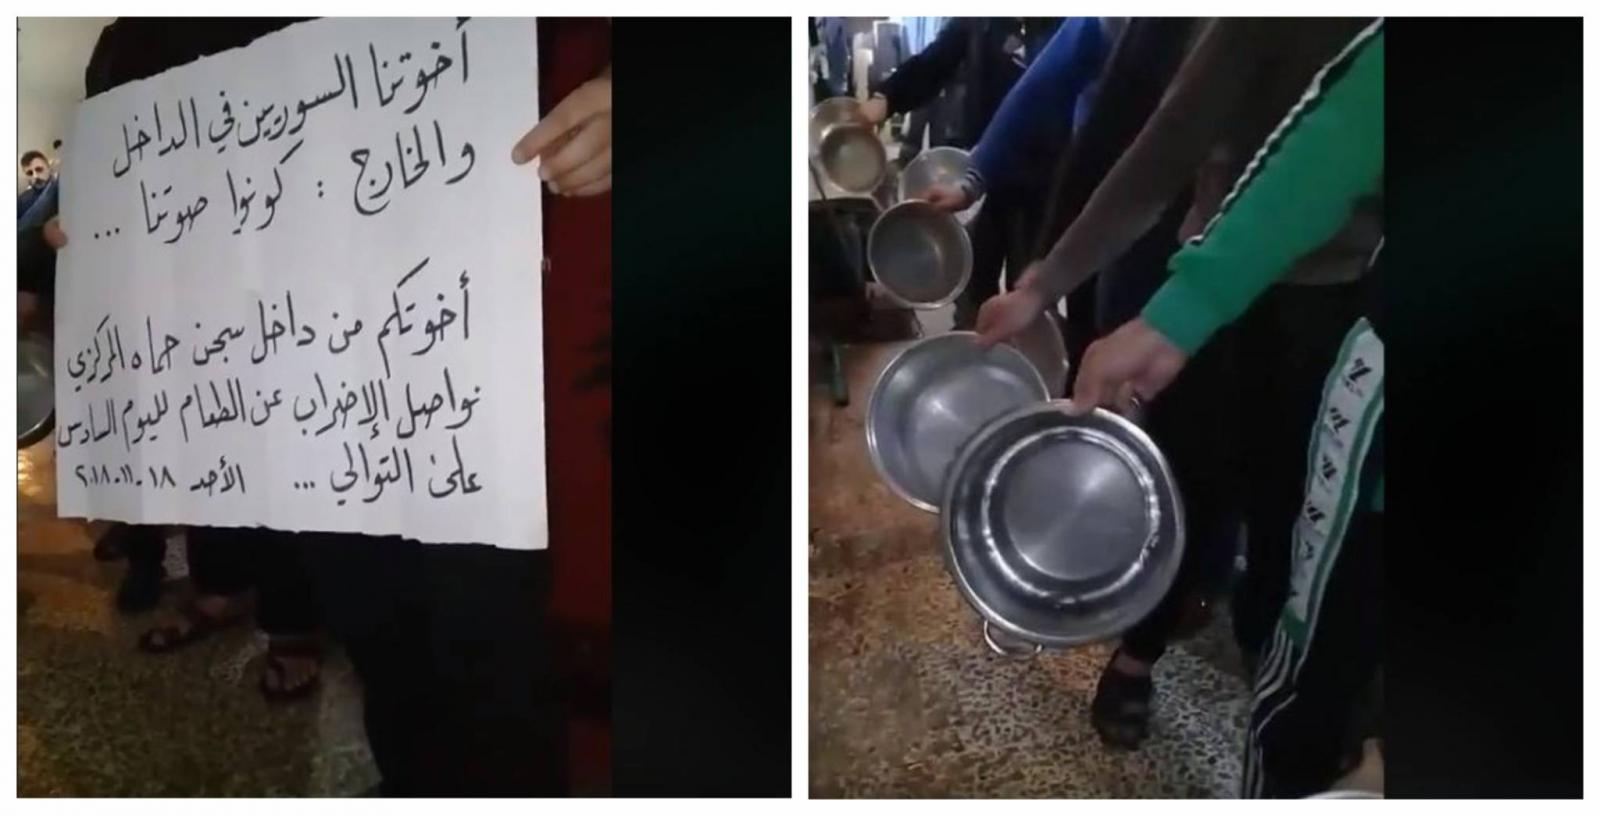 Detainees in Hama Prison go on hunger strike to protest death sentences